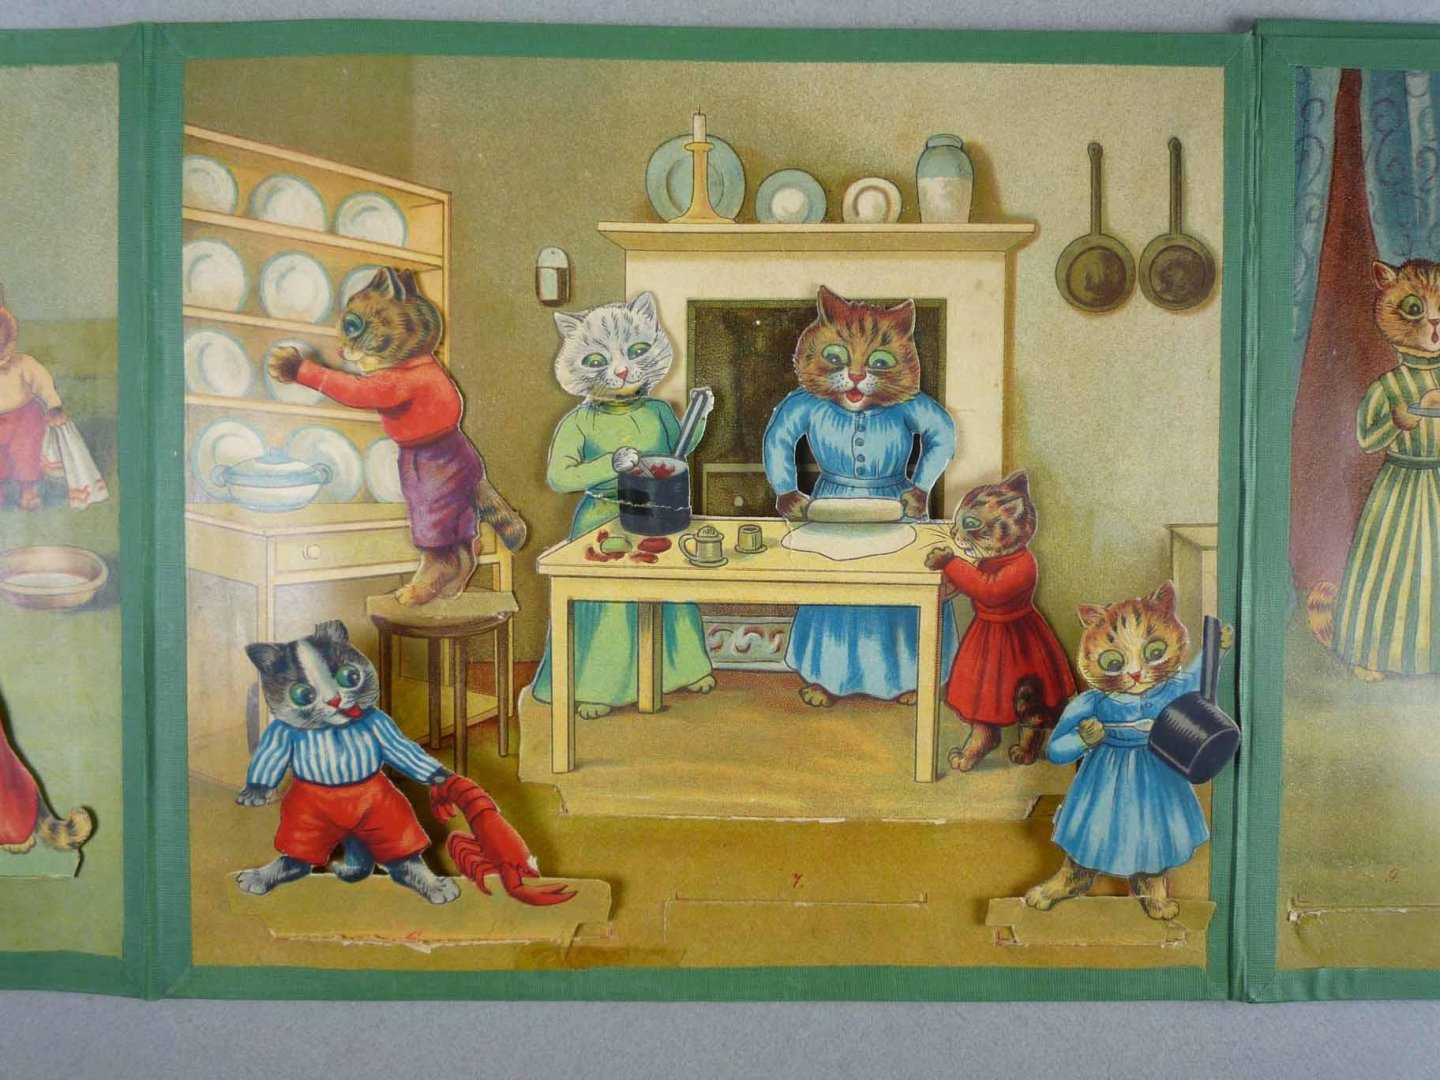 Burnaby, Arthur - Days in Catland with Louis Wain